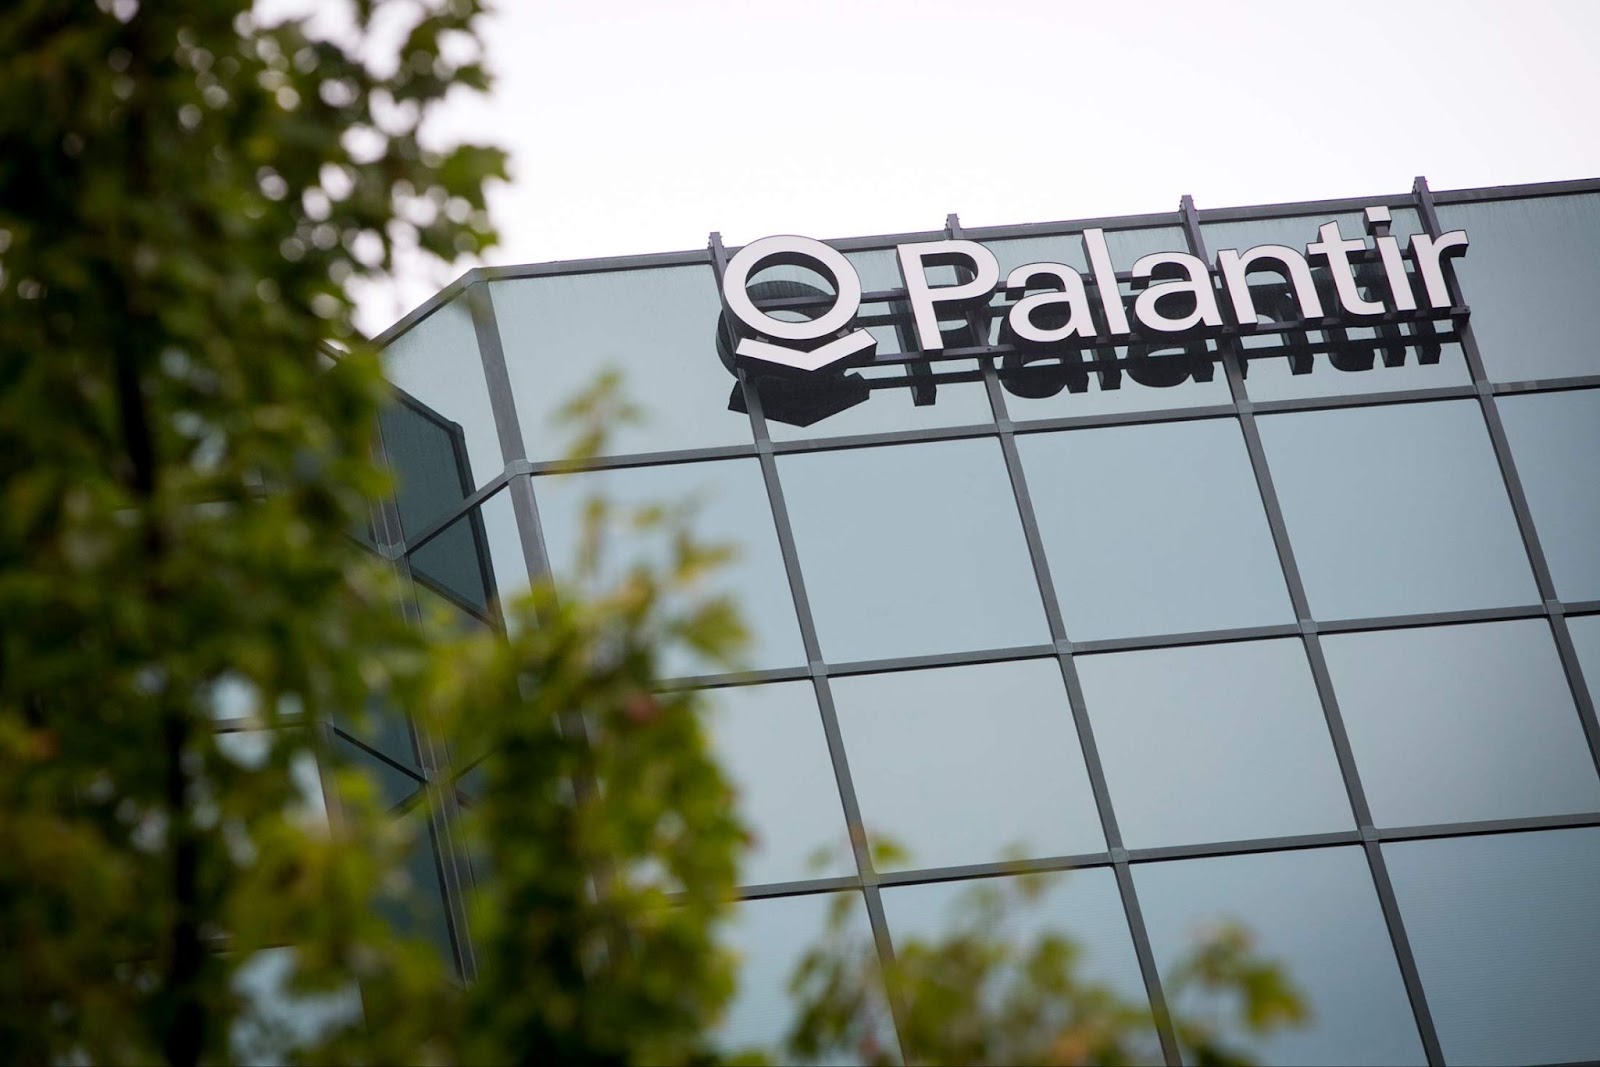  Palantir Technologies: Researching and Selecting the Right Technology